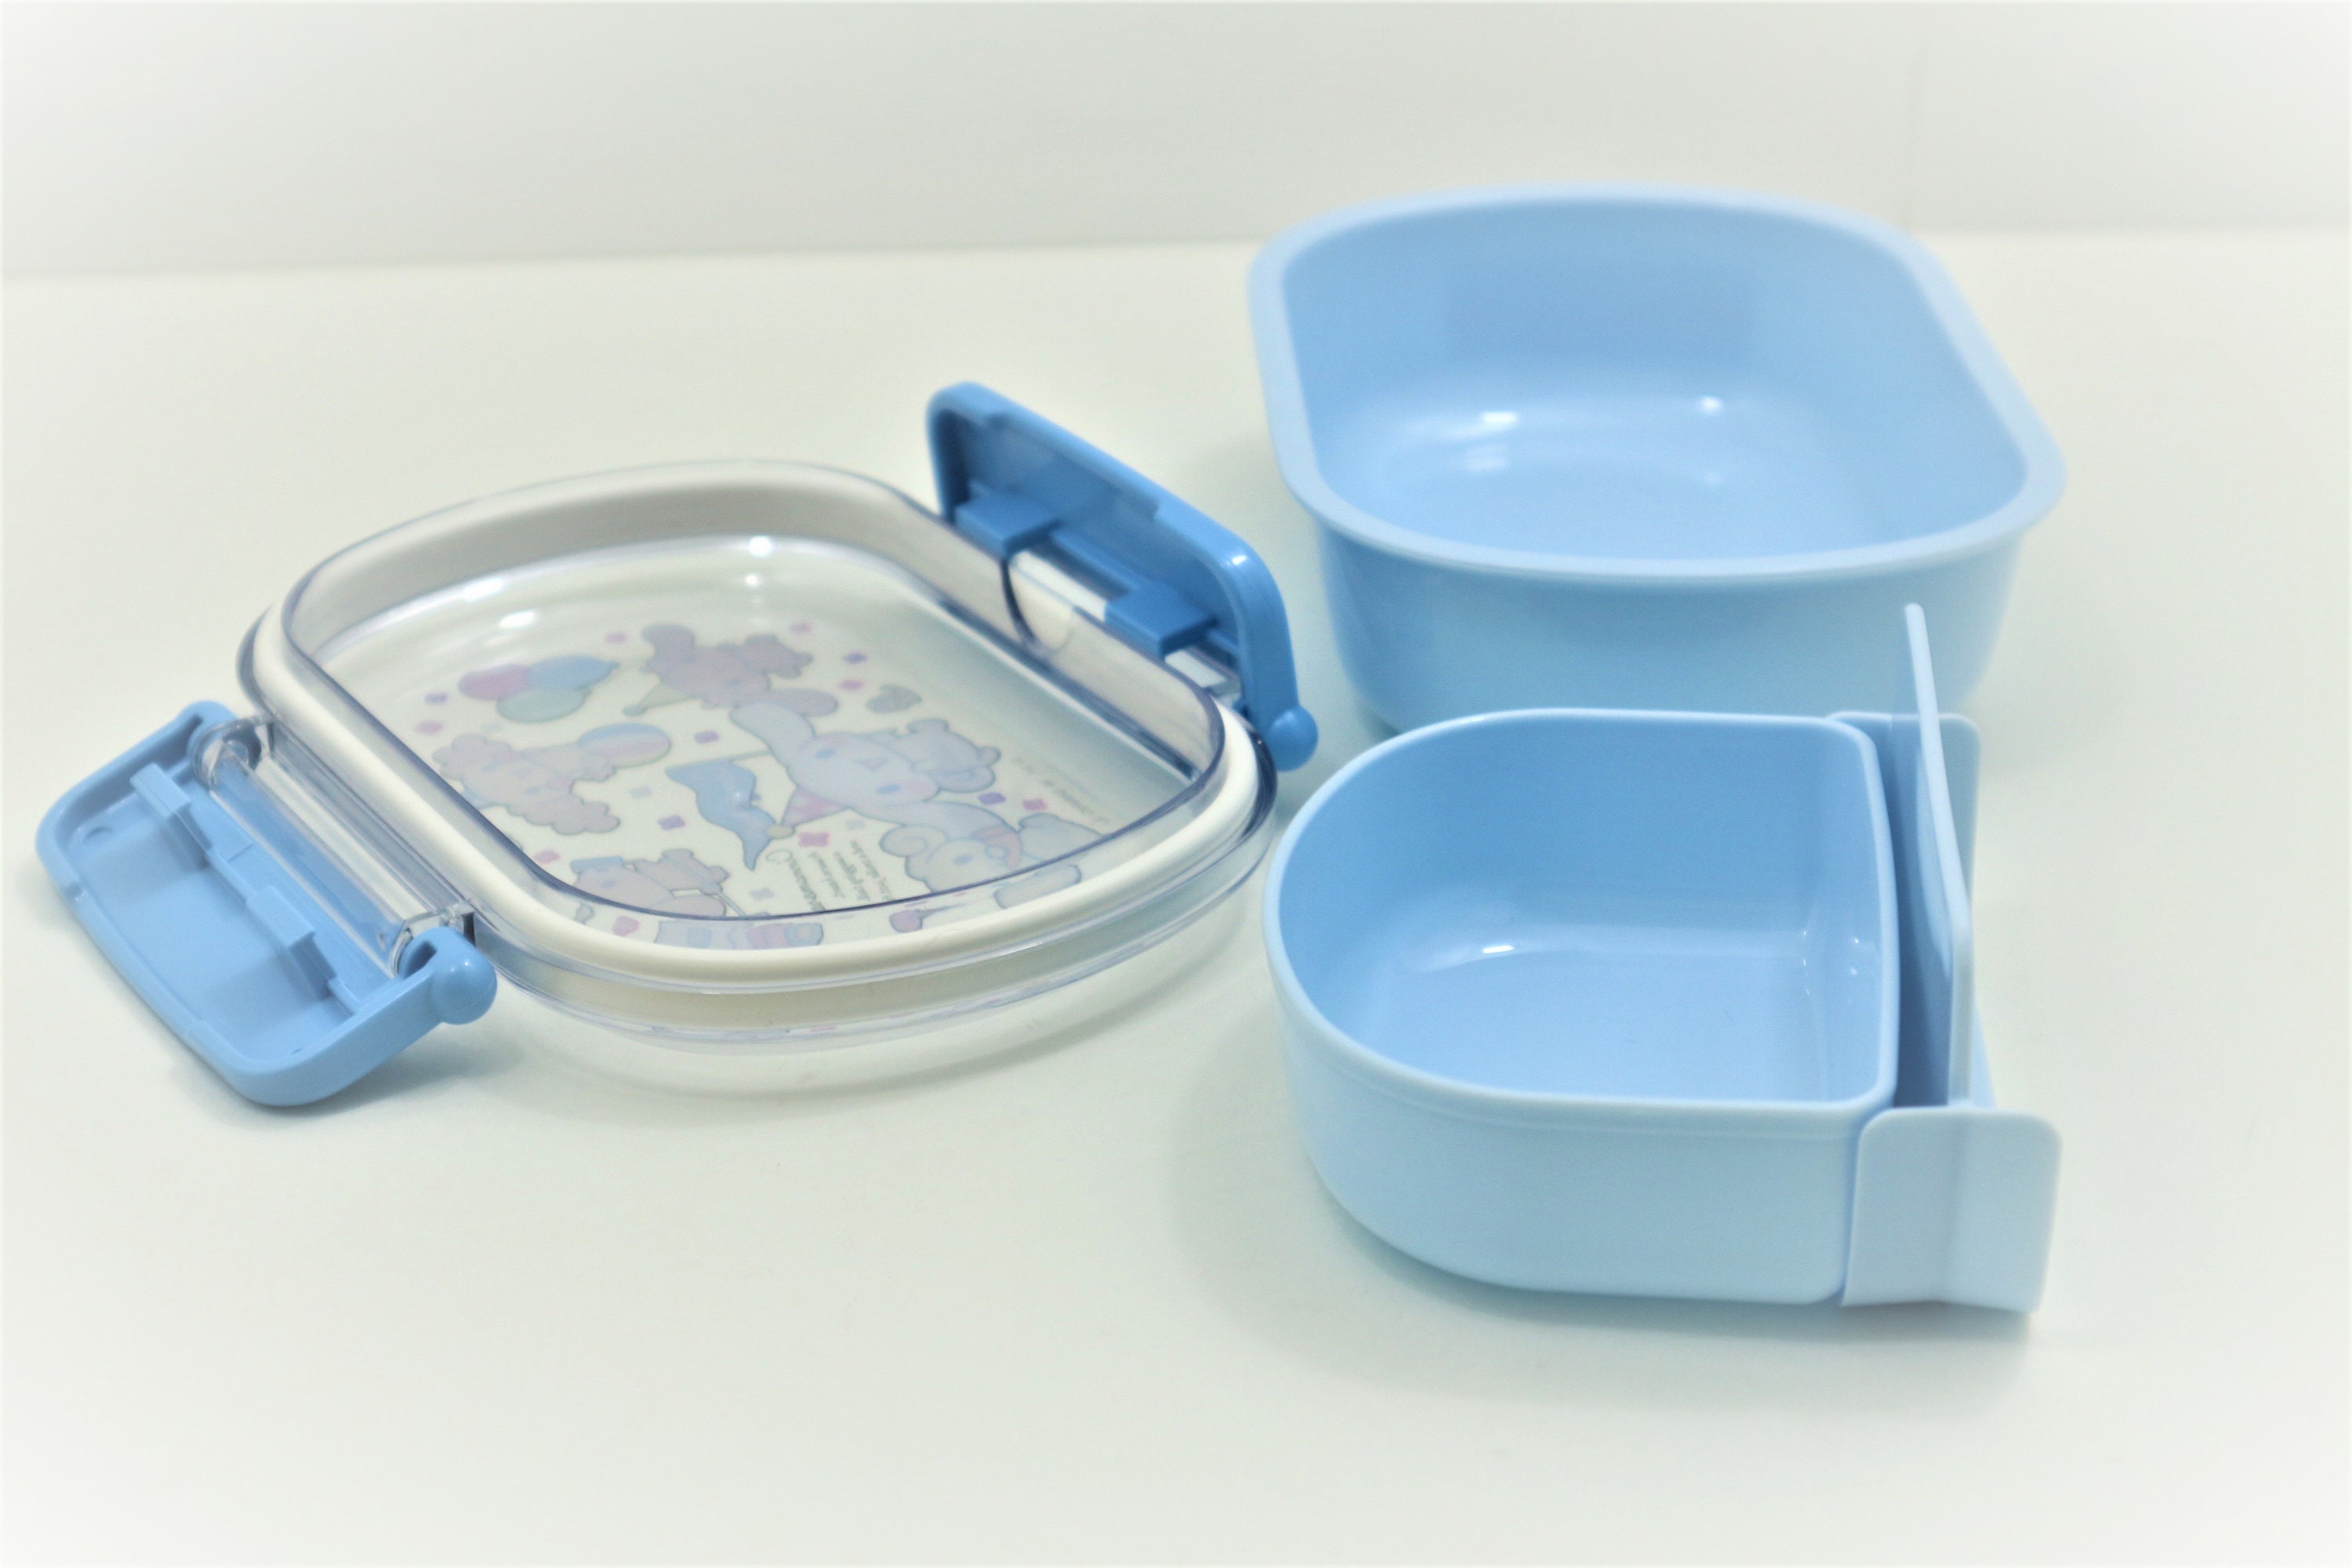  Cinnamoroll Bento Lunch Box (15oz) - Cute Lunch Carrier with  Secure 2-Point Locking Lid - Authentic Japanese Design - Durable, Microwave  and Dishwasher Safe - Friends: Home & Kitchen